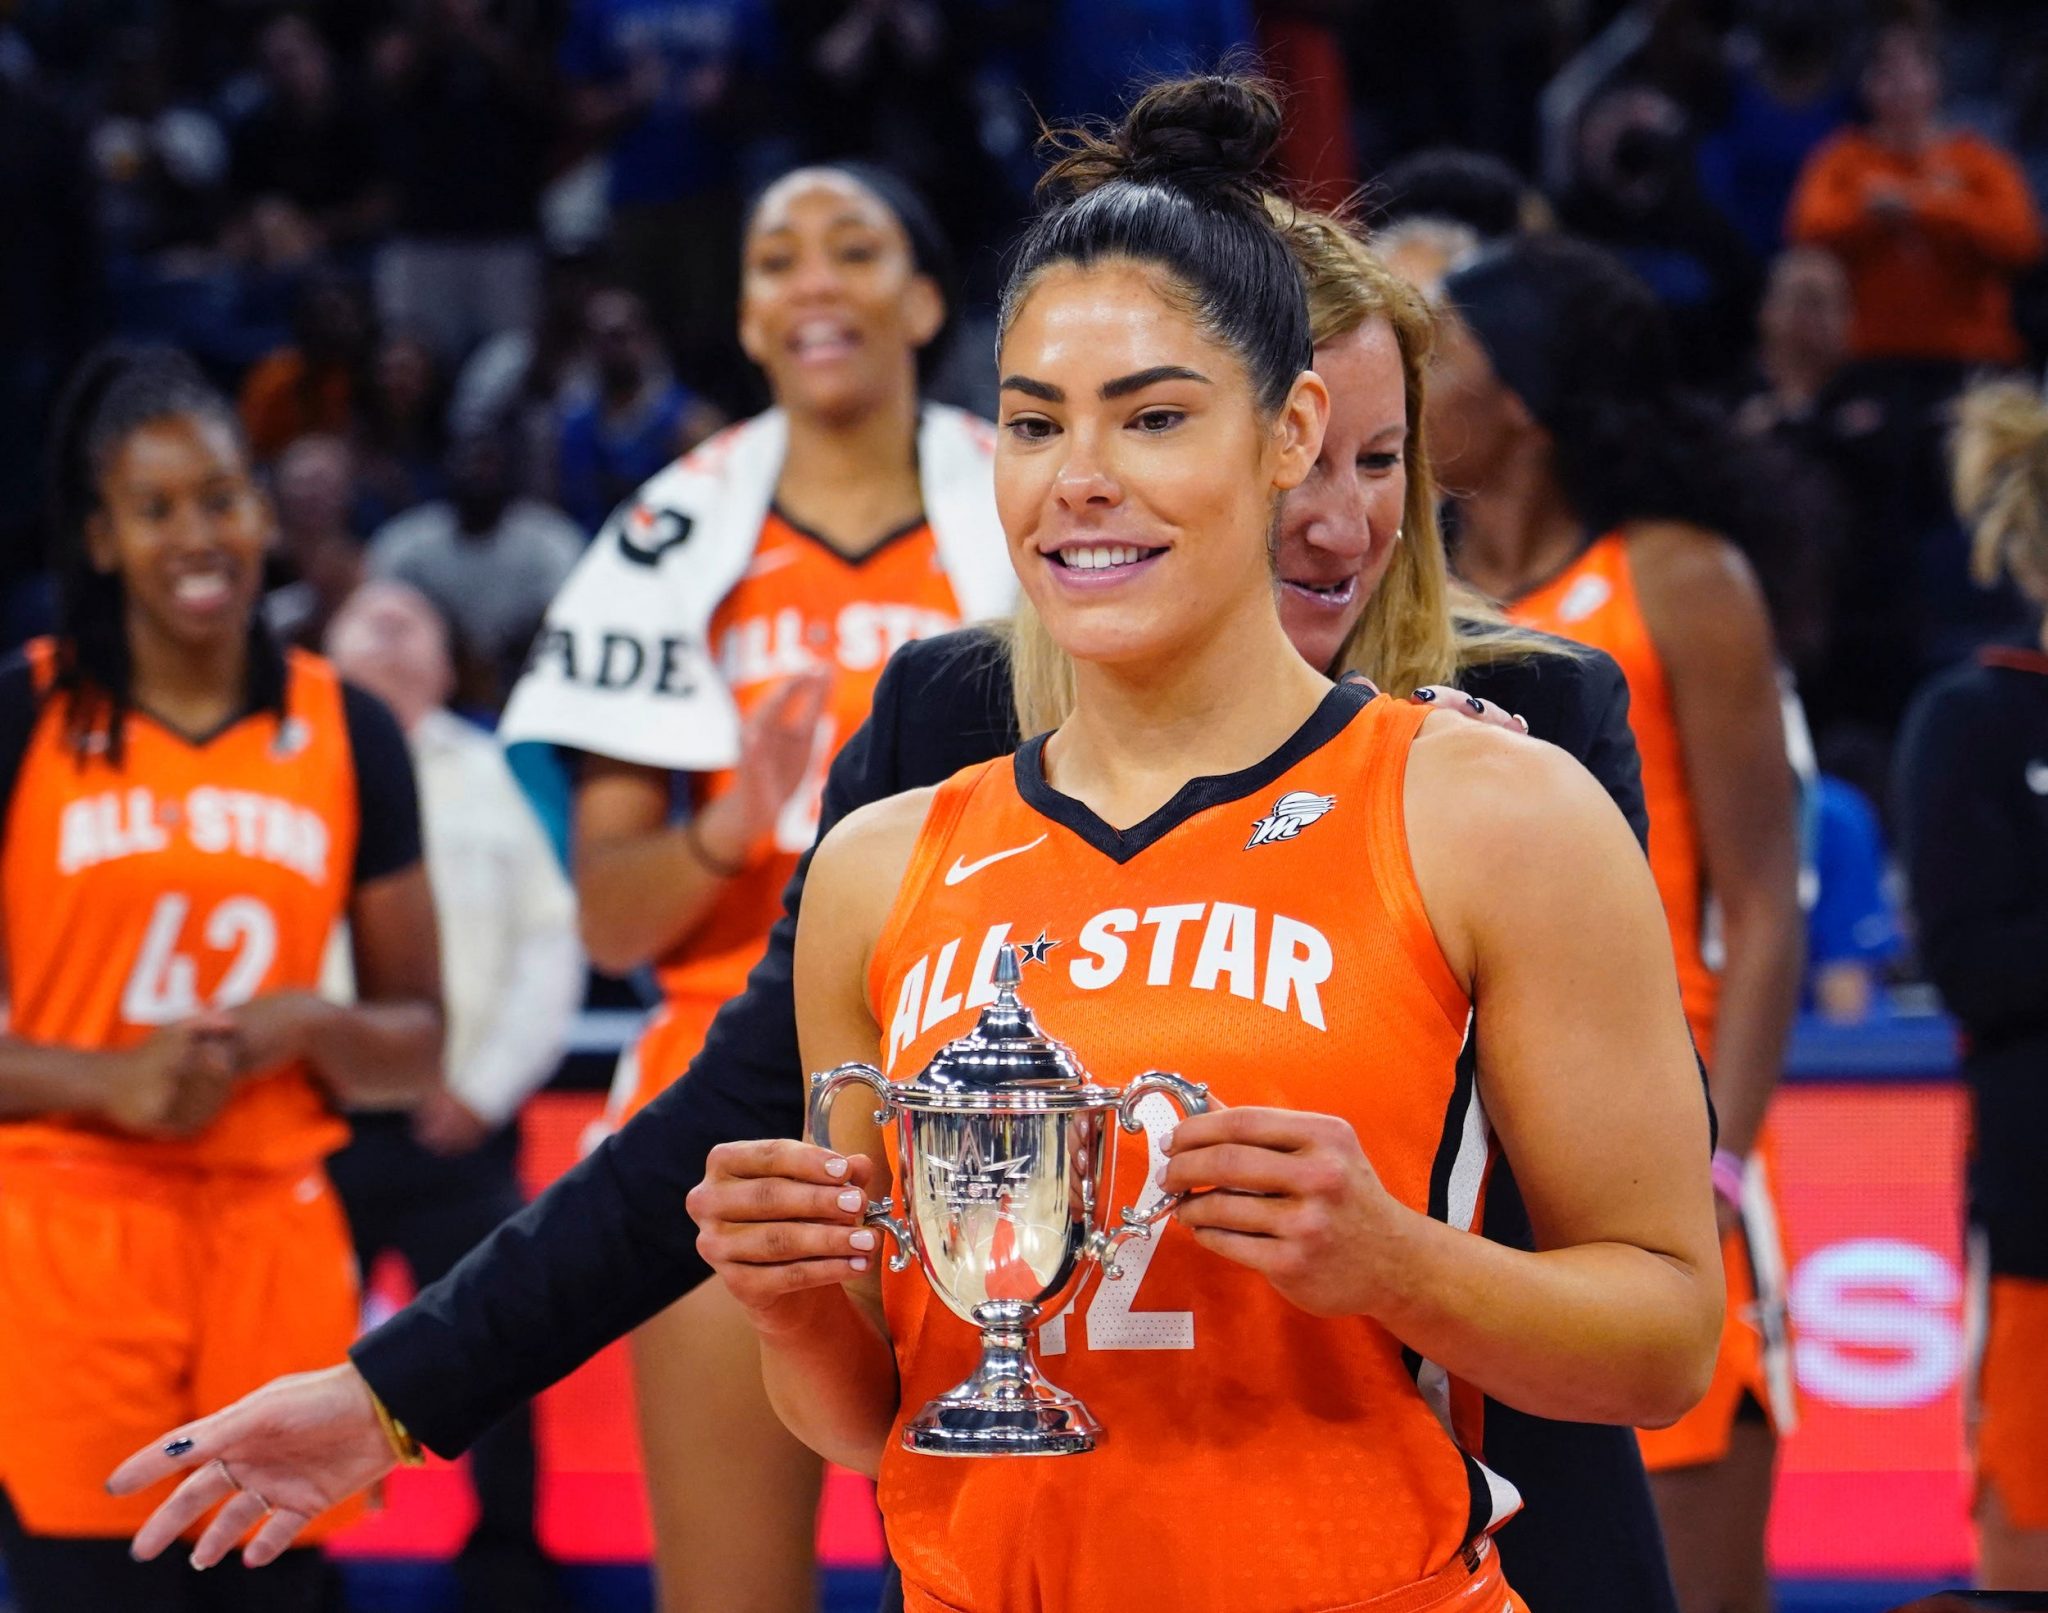 The WNBA commissioner pranked Kelsey Plum by presenting the 2022 WNBA